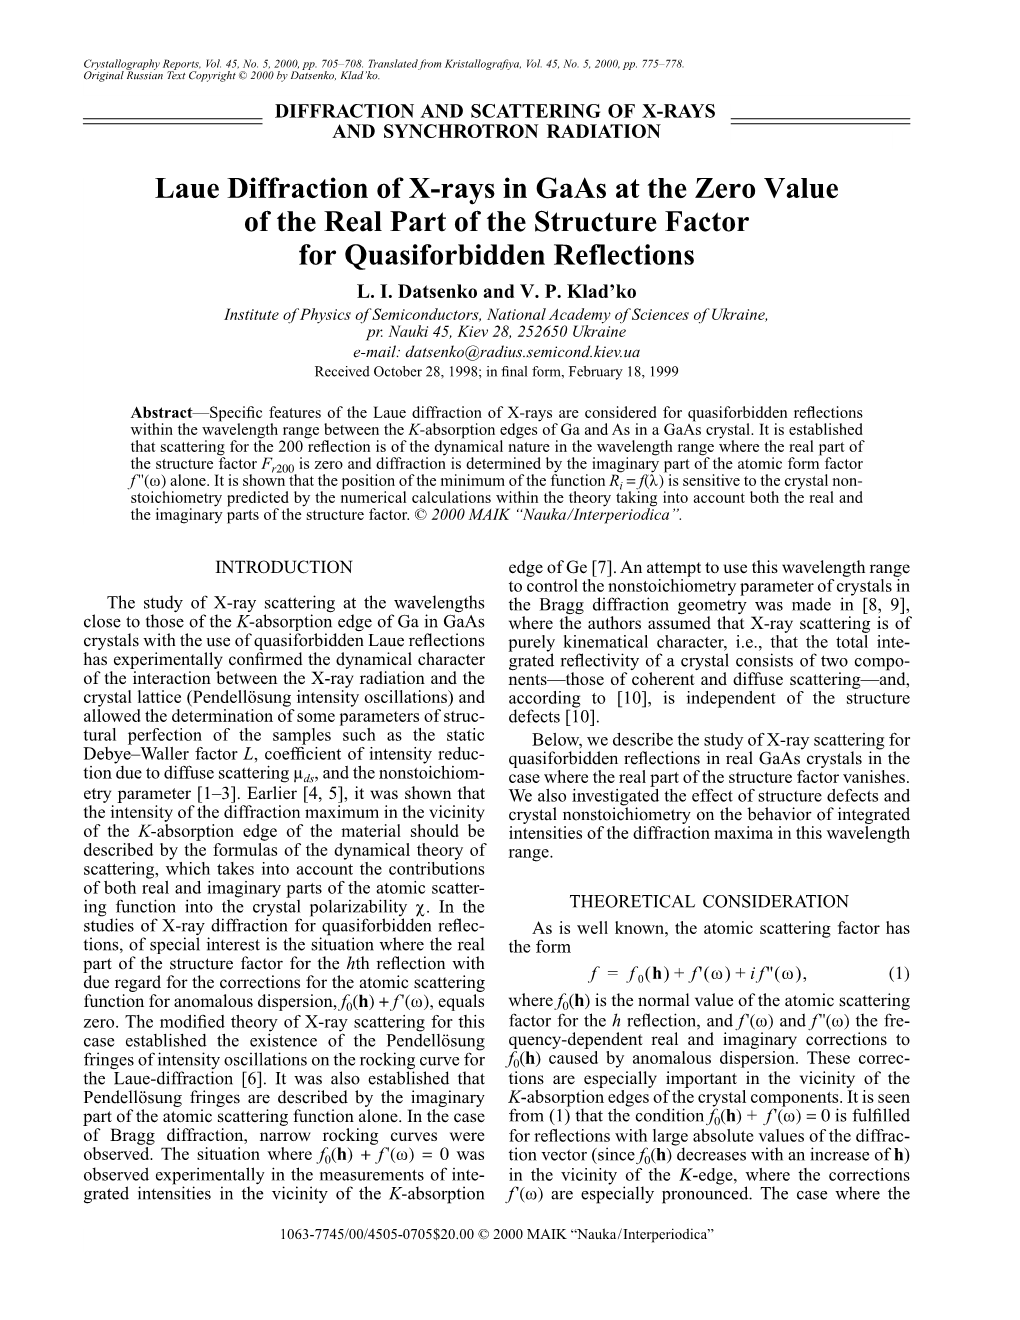 Laue Diffraction of X-Rays in Gaas at the Zero Value of the Real Part of the Structure Factor for Quasiforbidden Reflections L